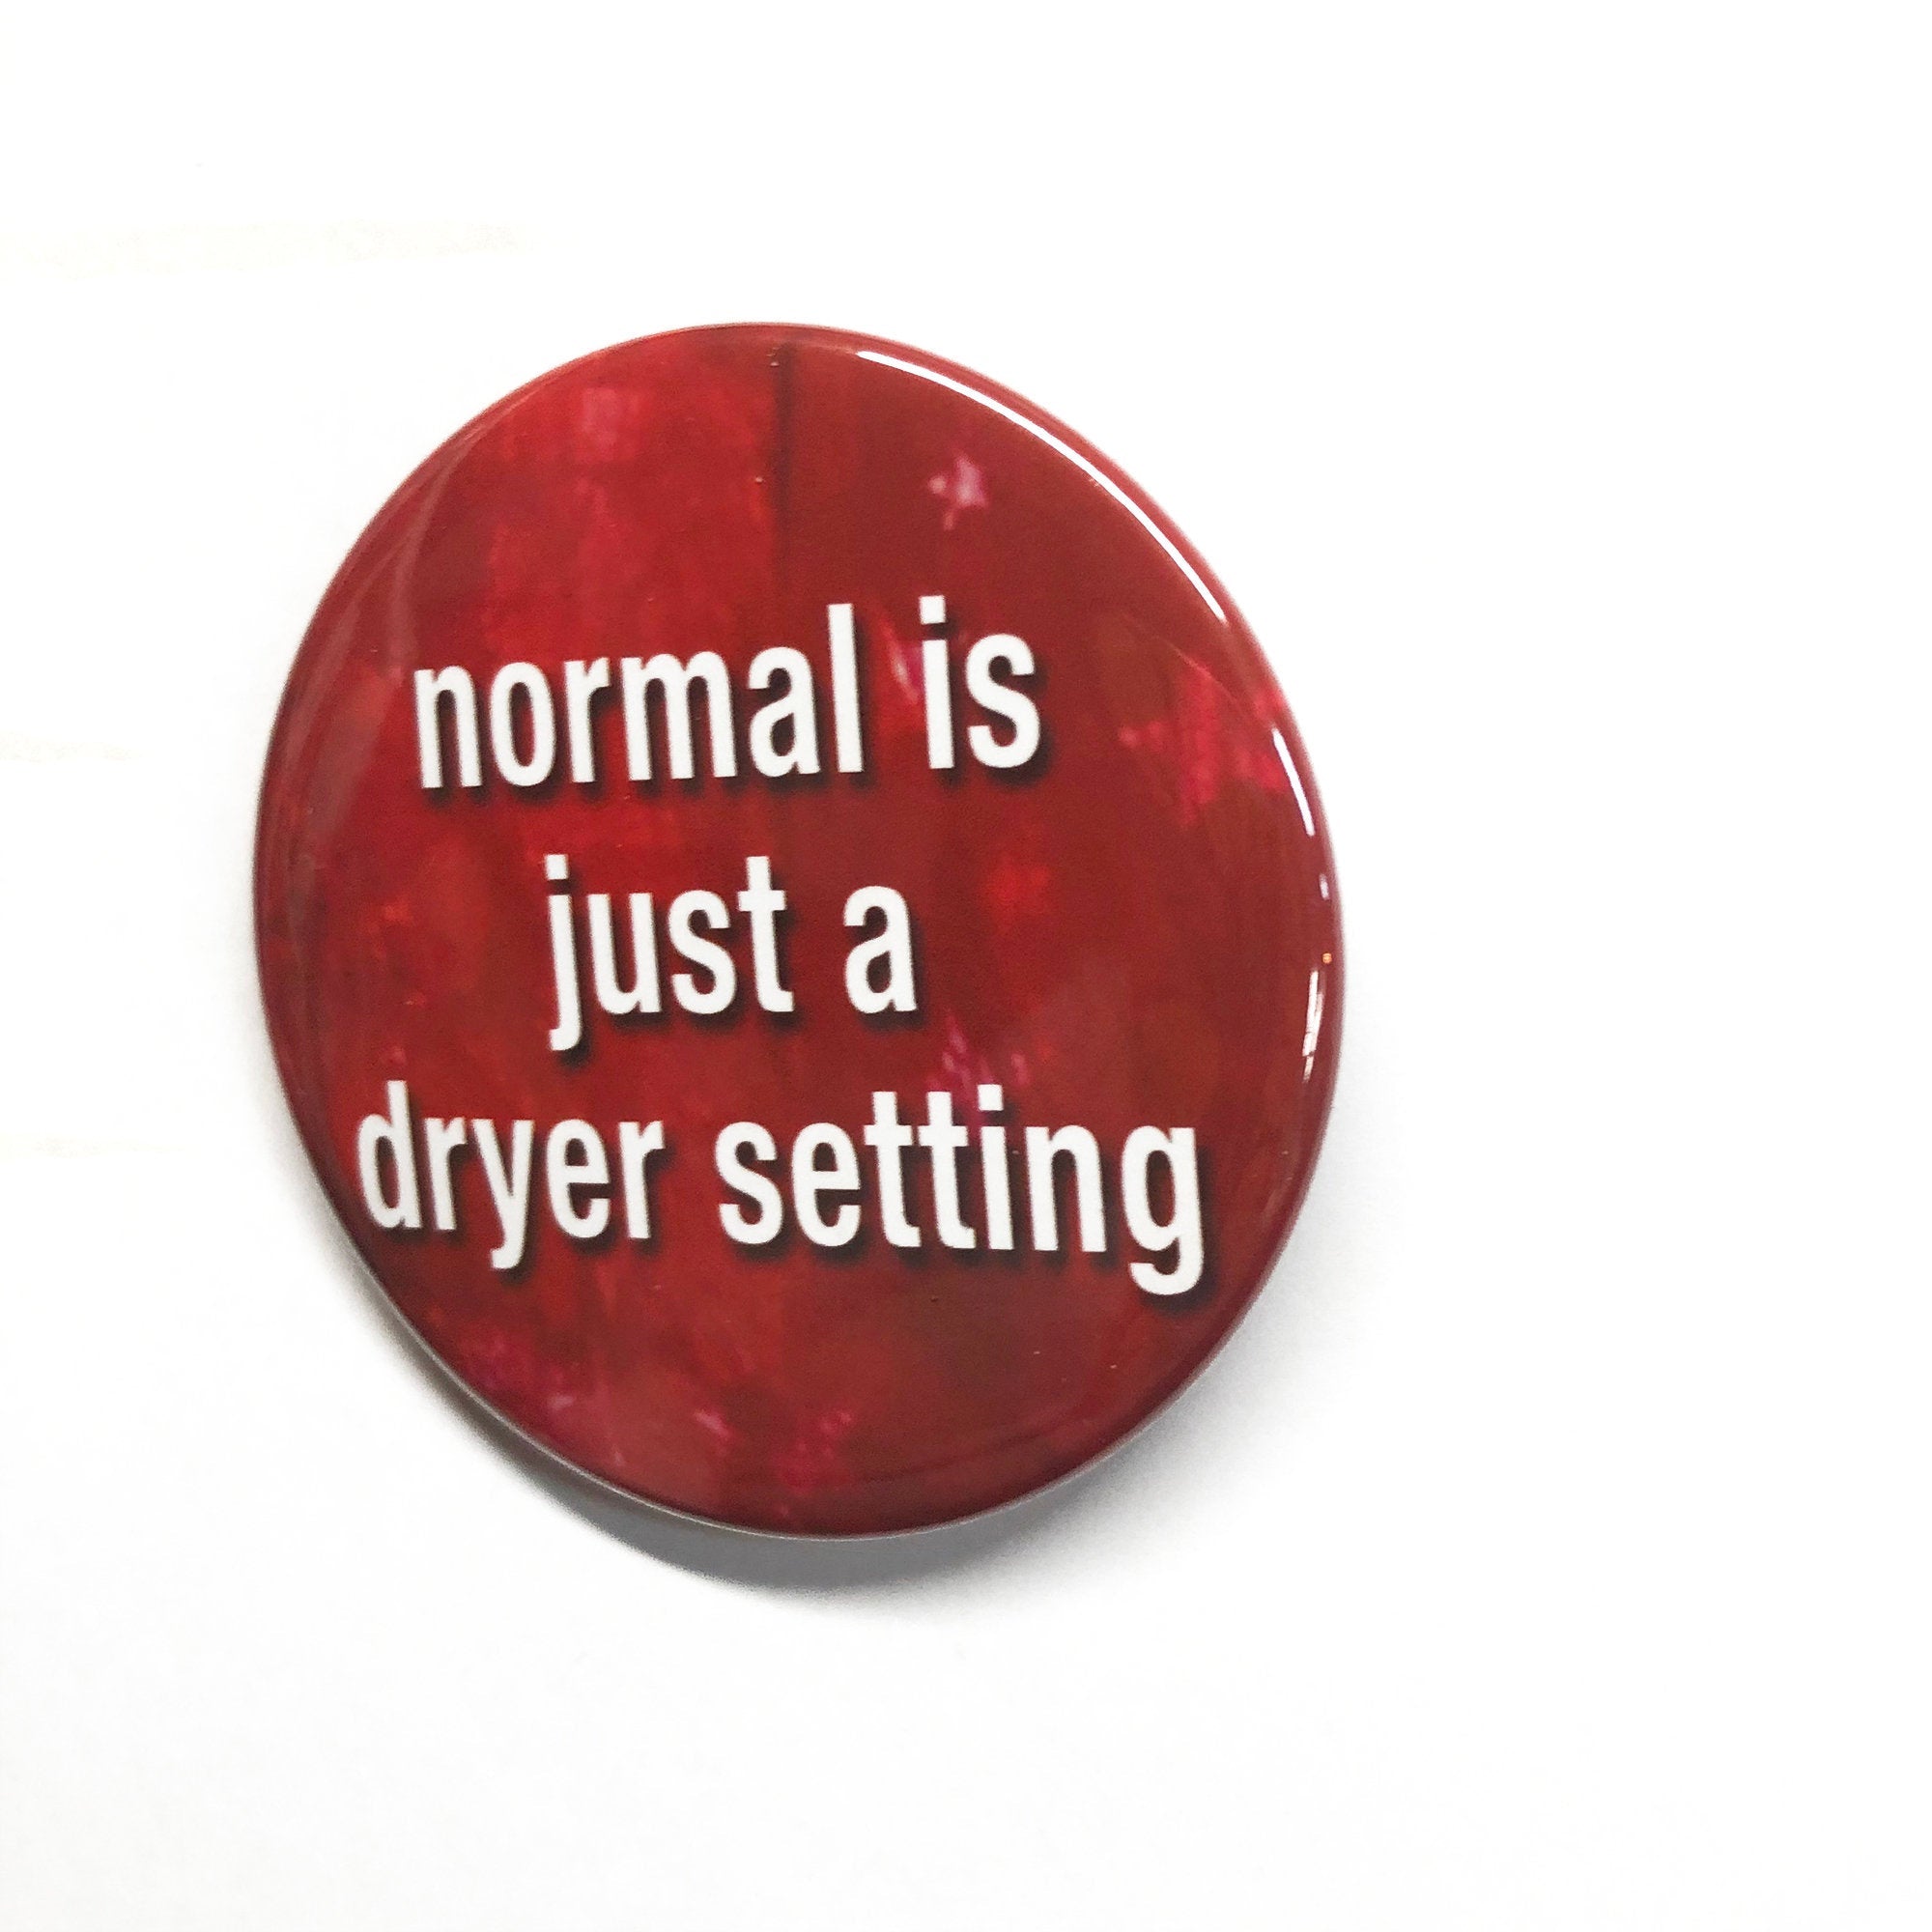 Normal Is Just A Dryer Setting Pin, Magnet or Pocket Mirror